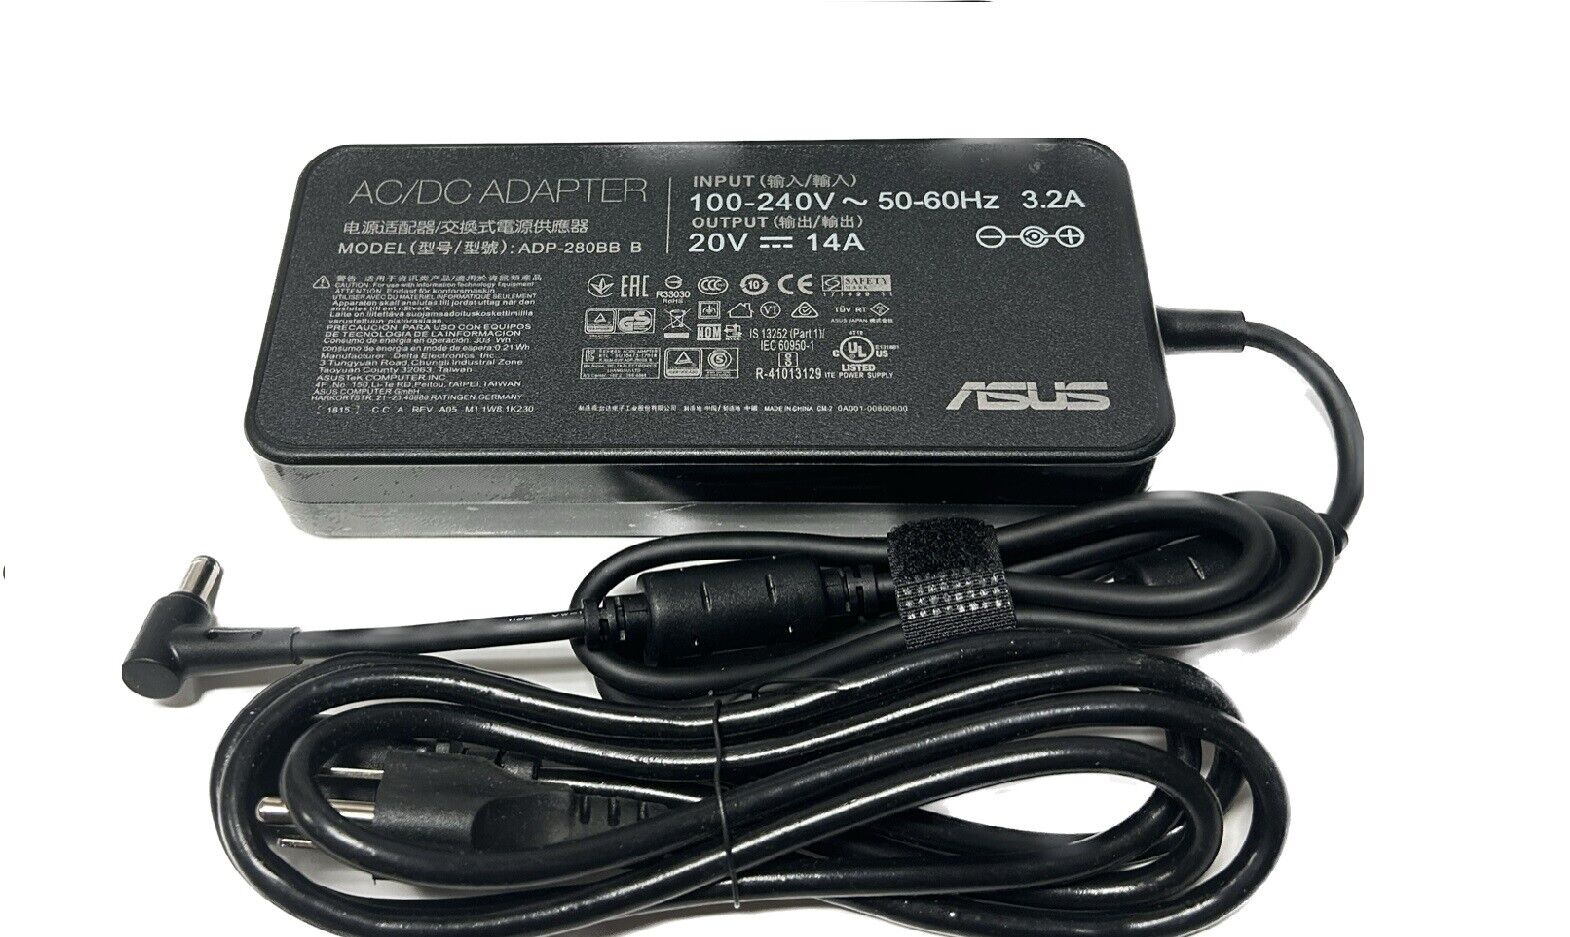 OEM Asus 280W 20V 14A ADP-280EB B AC Adapter Cord for ASUS ROG Strix G614JV-AS73